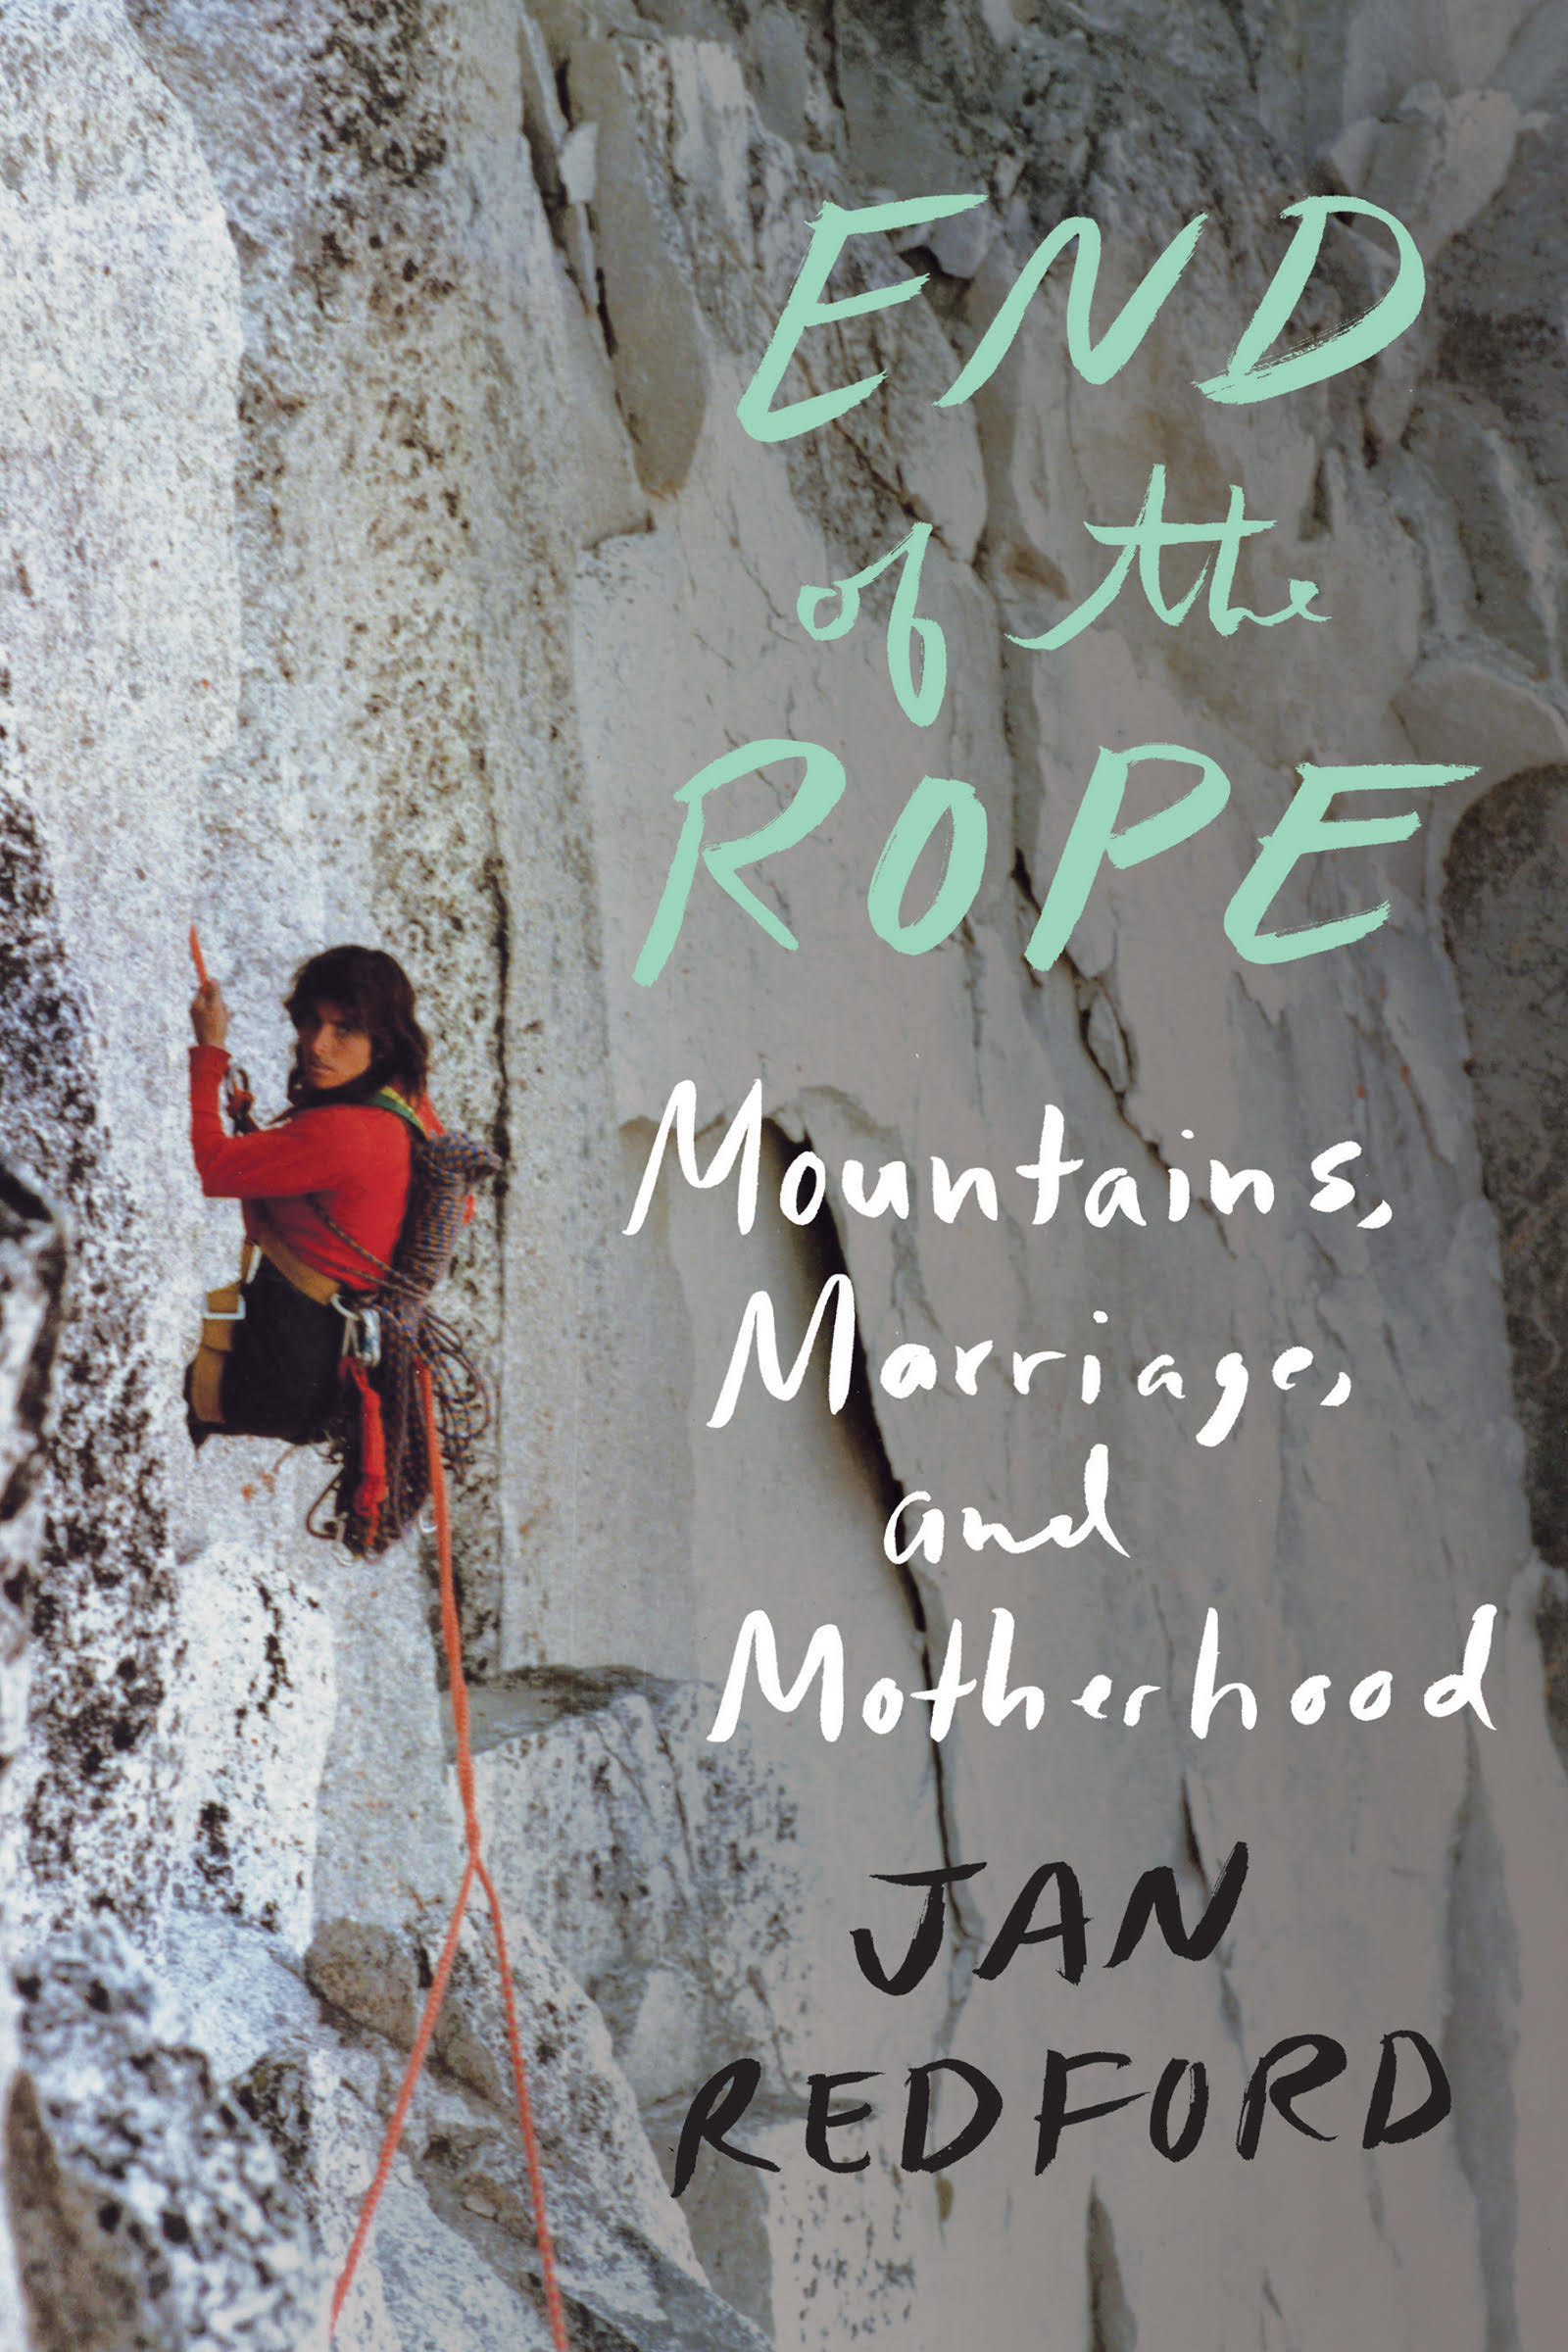 End of the Rope: Mountains, Marriage, and Motherhood by Jan Redford. Counterpoint Press, 2018. Hardcover, 344 pages, $26.00.